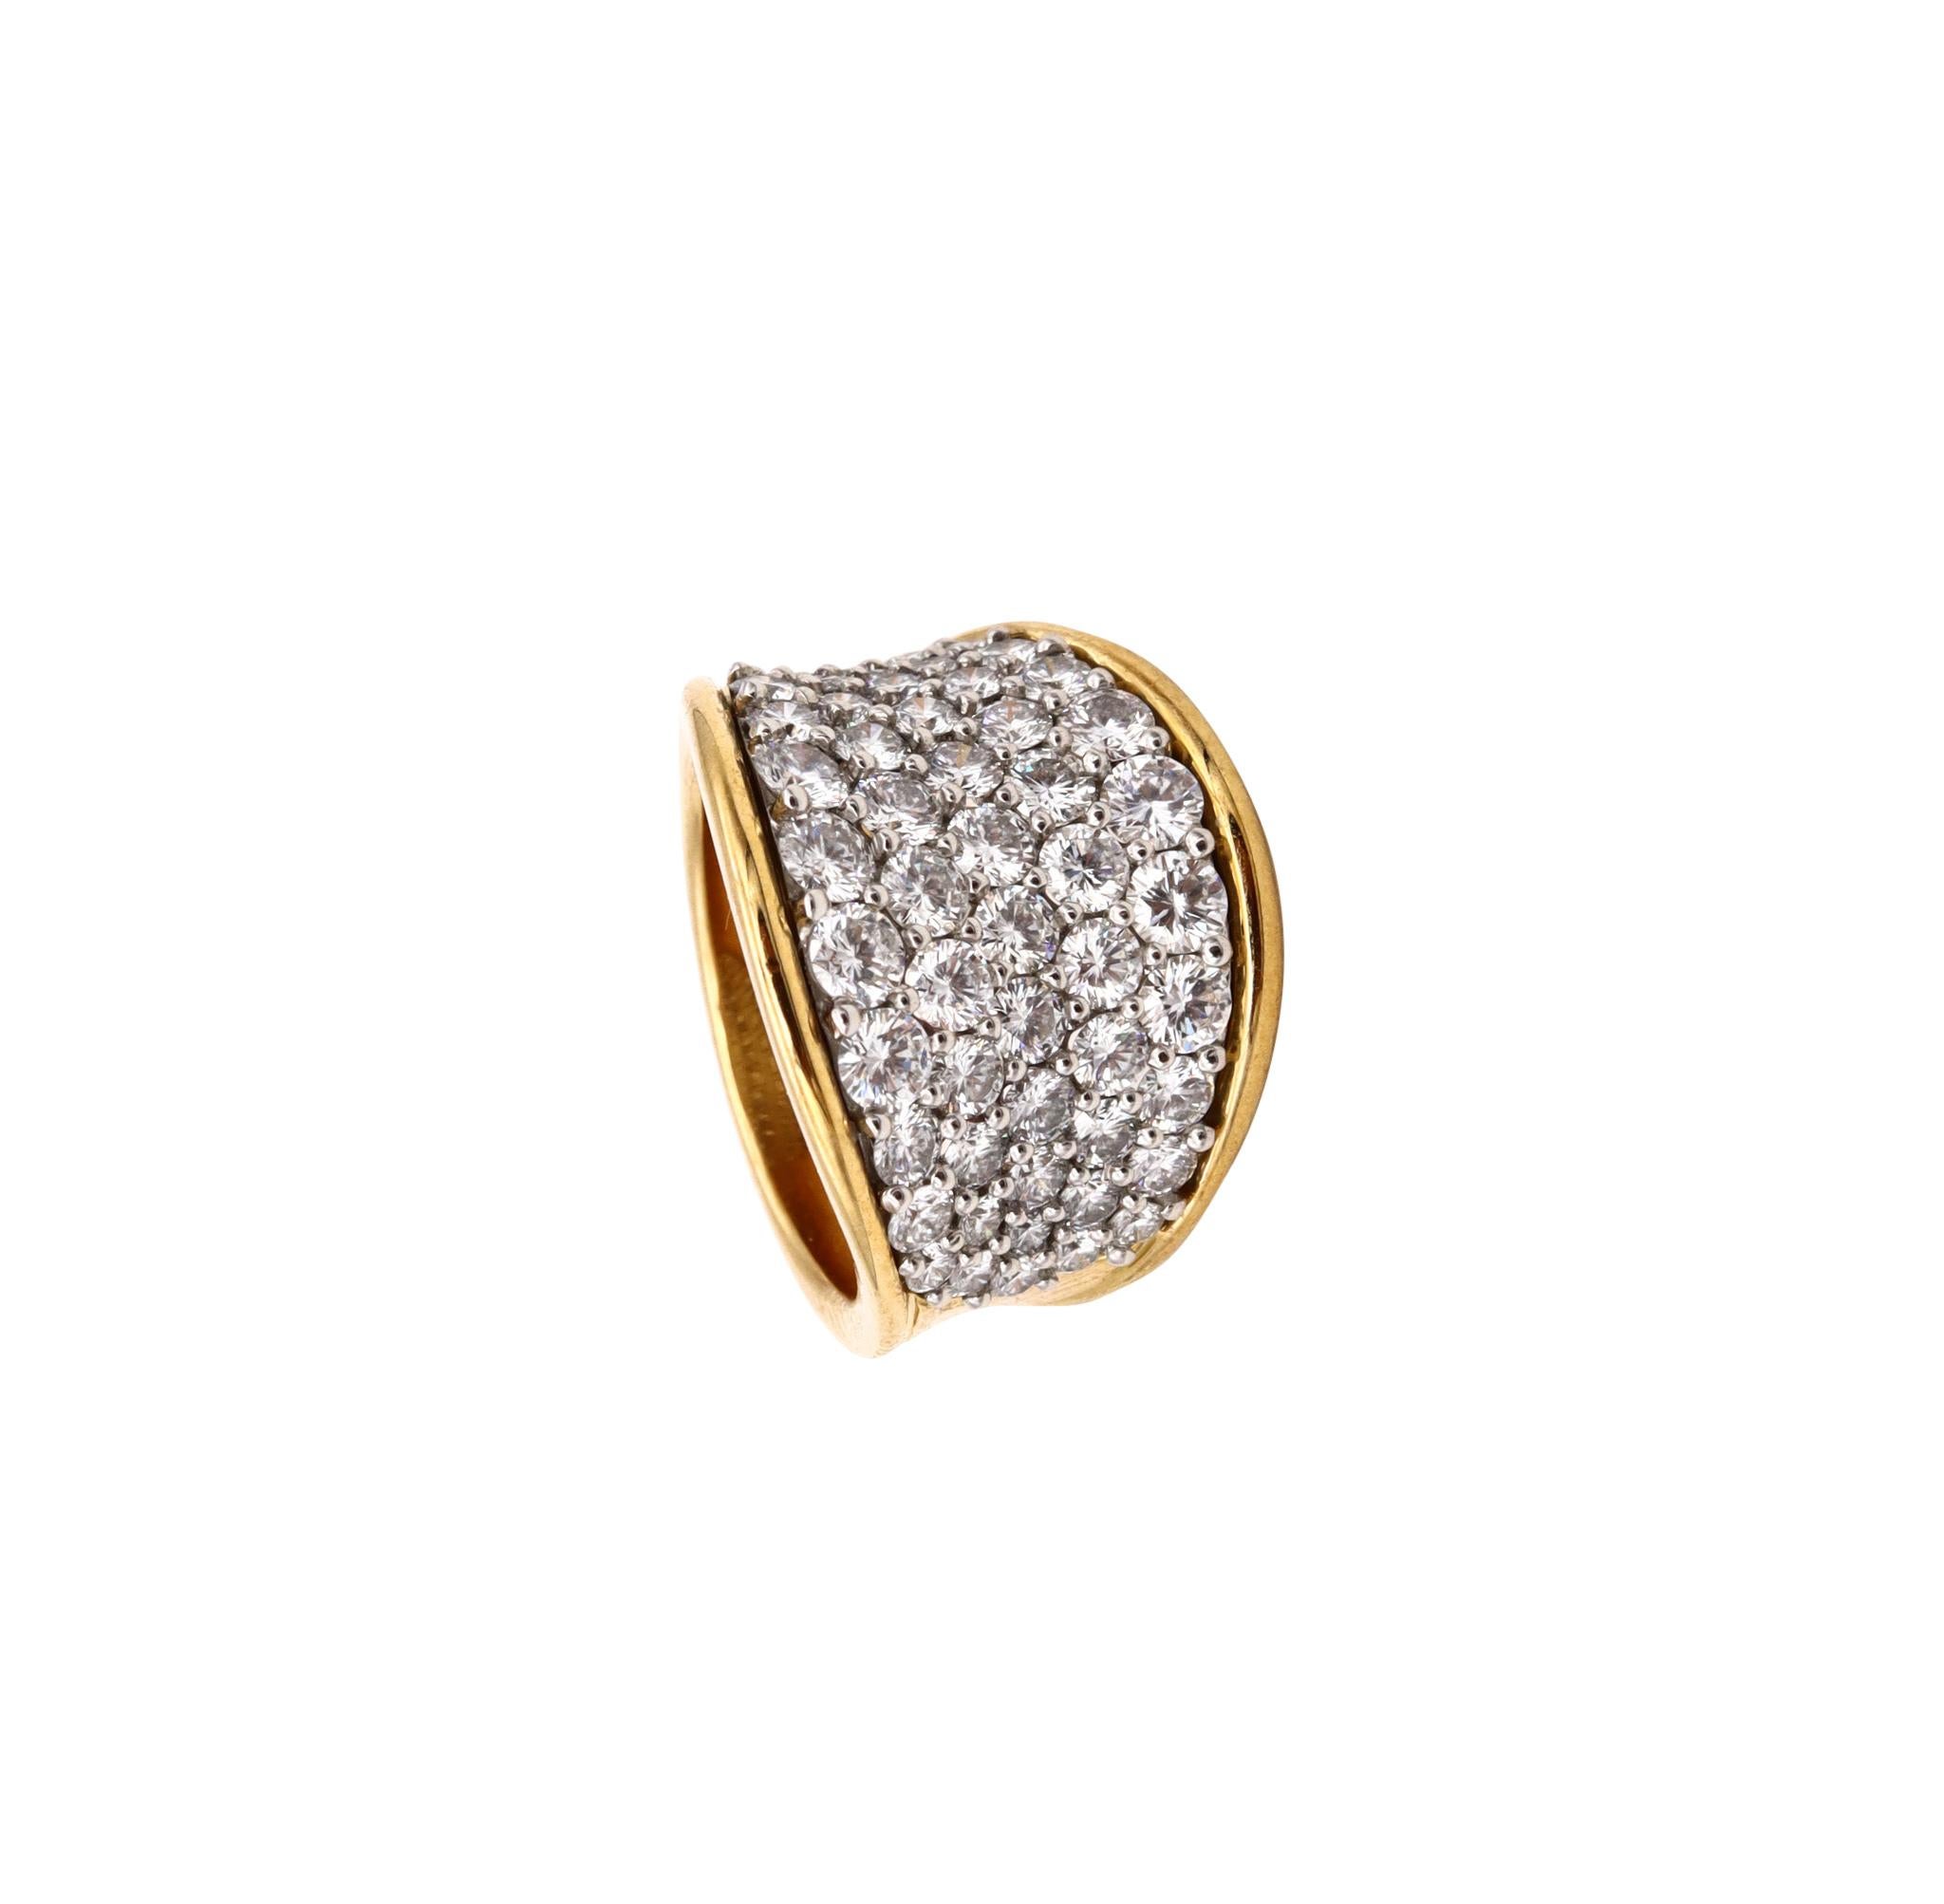 Designer Cluster Ring in Platinum and 18Kt Yellow Gold 3.78 Cts D VS Diamonds For Sale 4